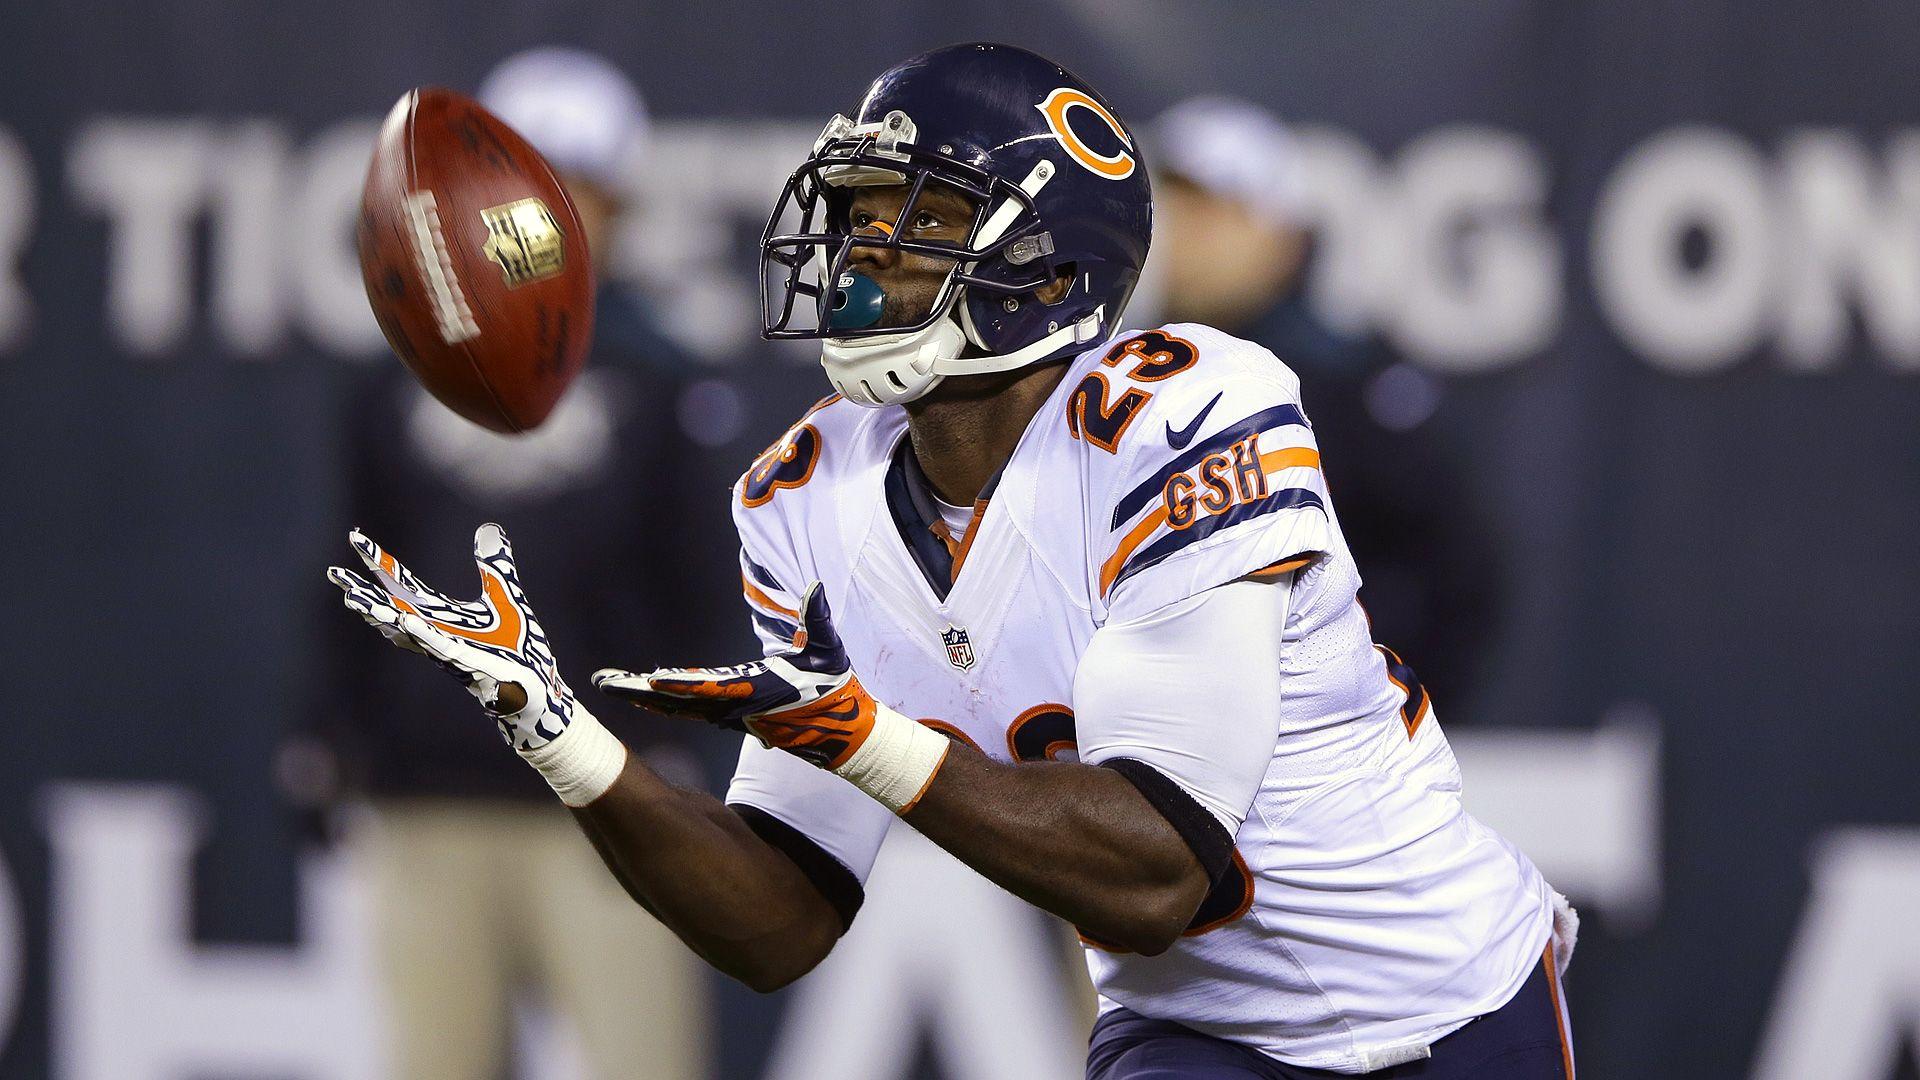 Devin Hester's days in Chicago seem to be finished. NFL